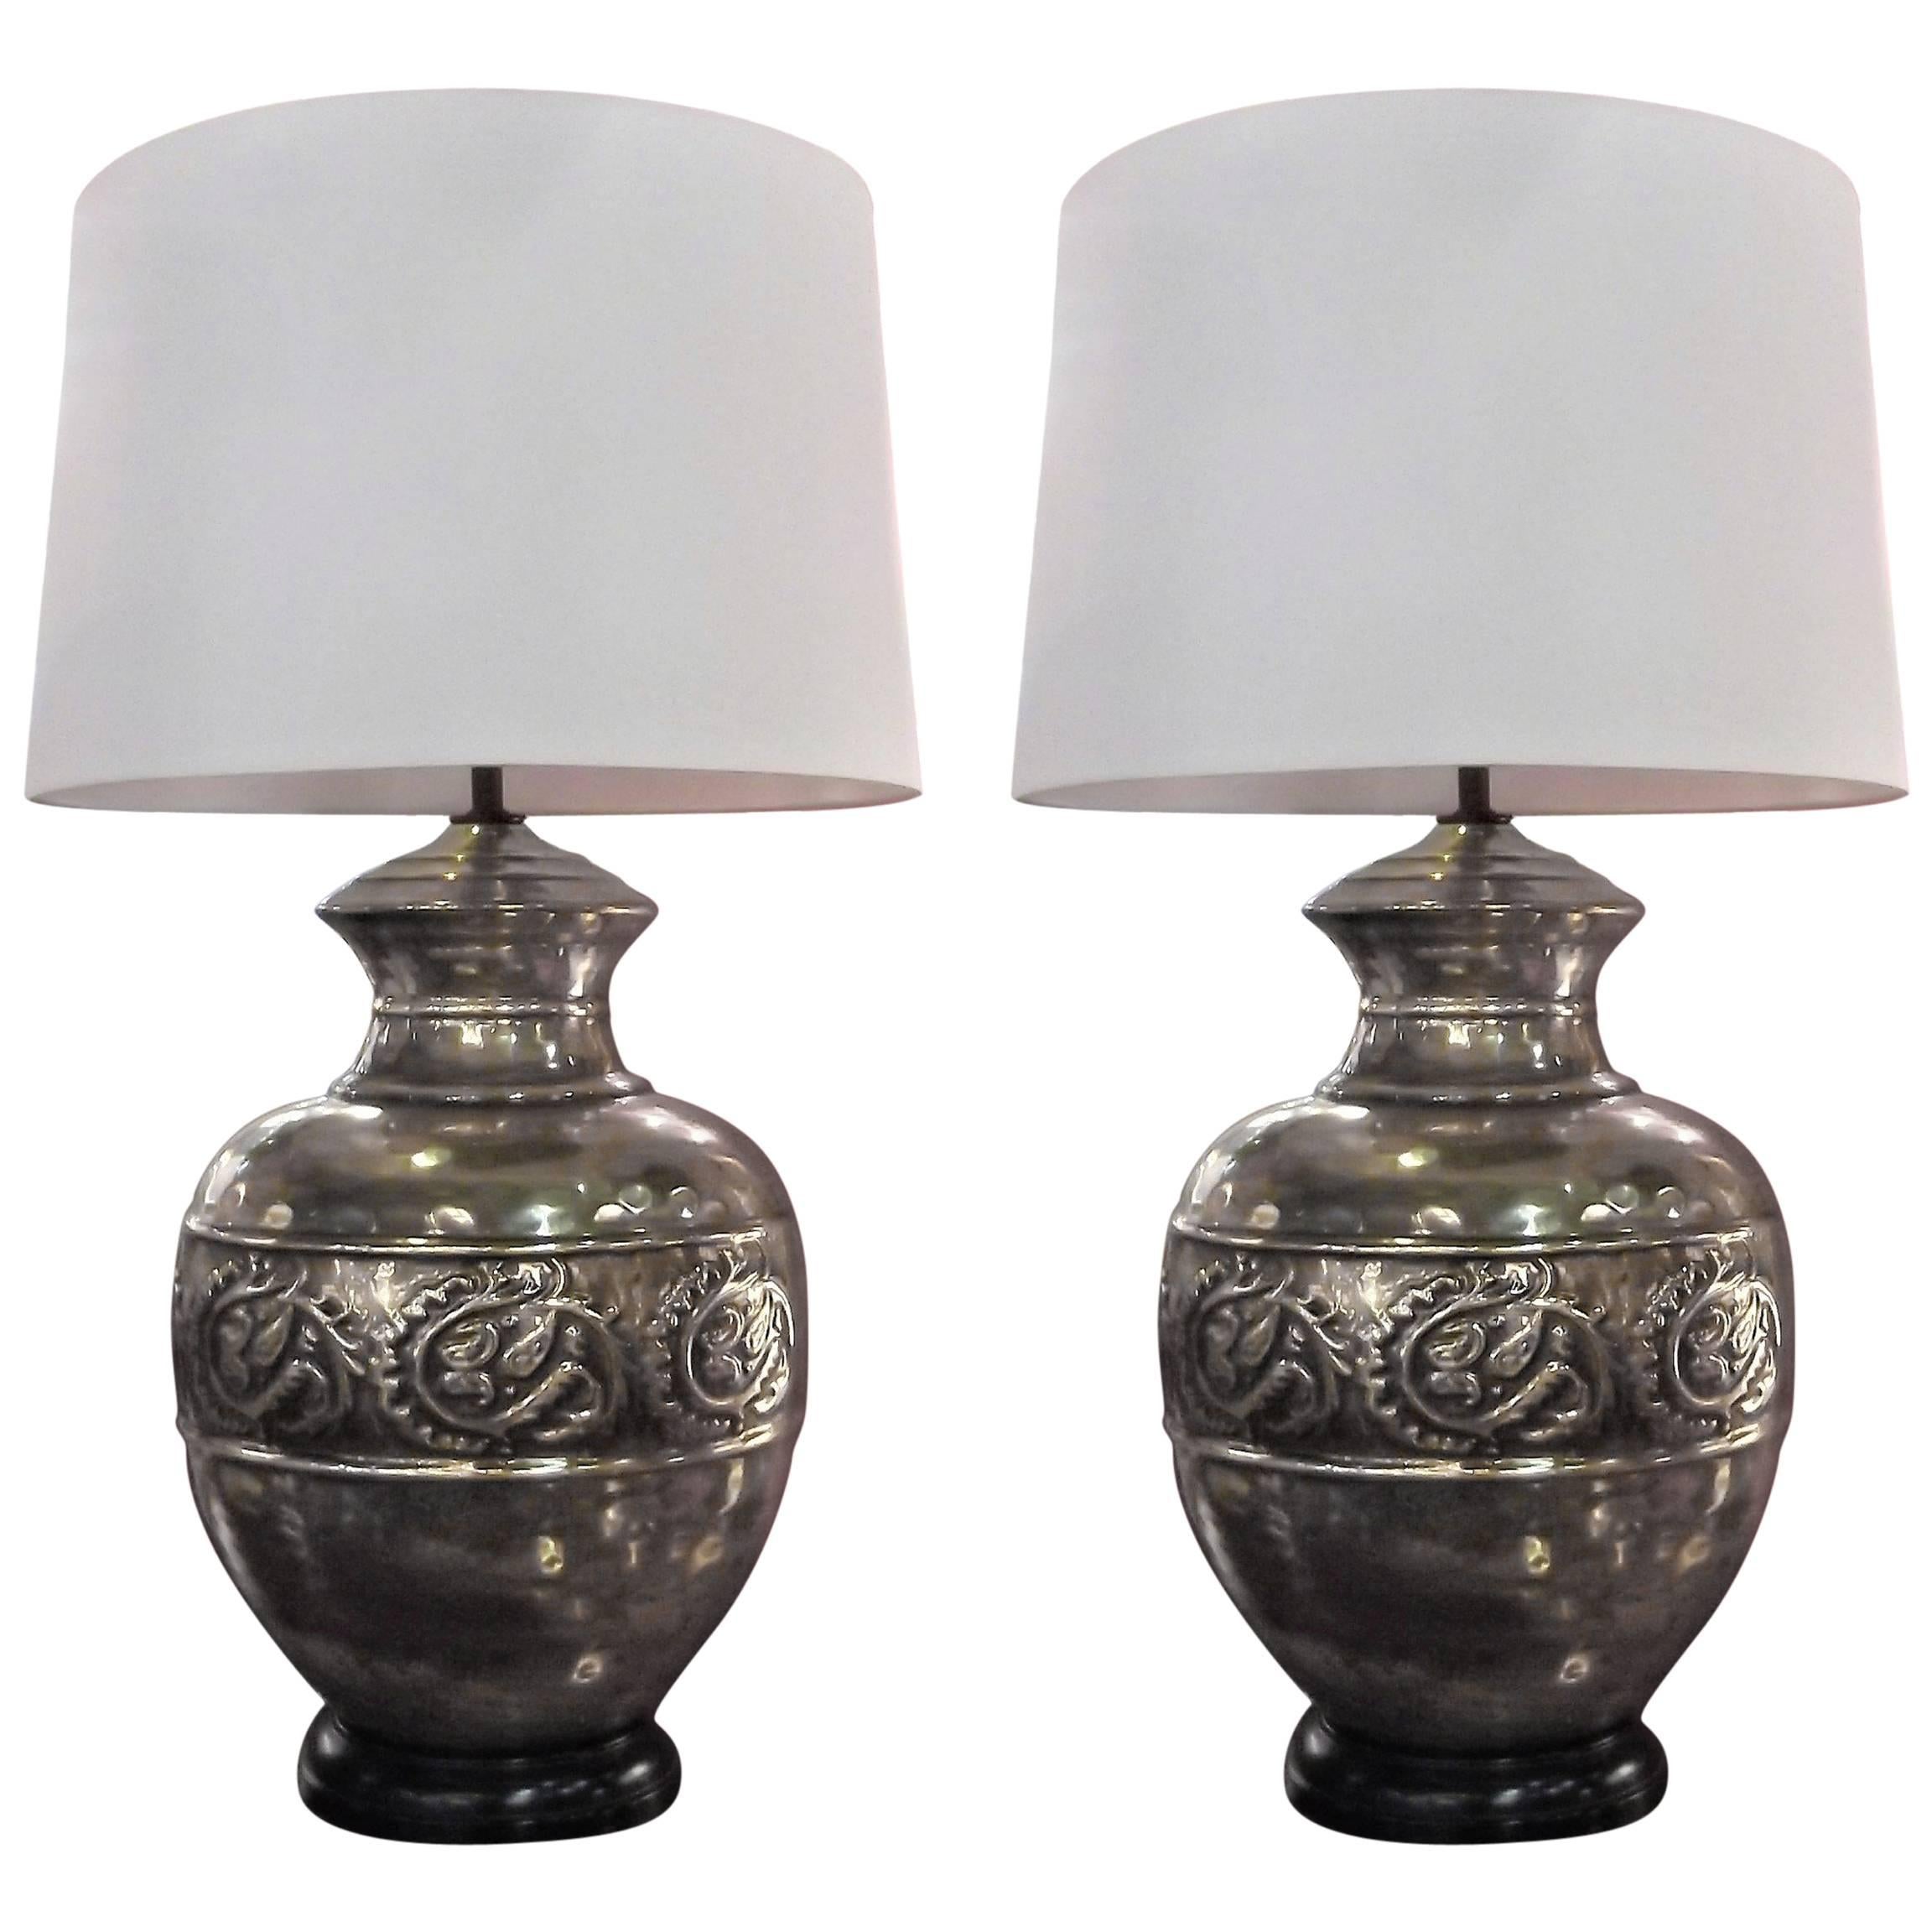 Pair of Metallic Glazed Pottery Urn Lamps